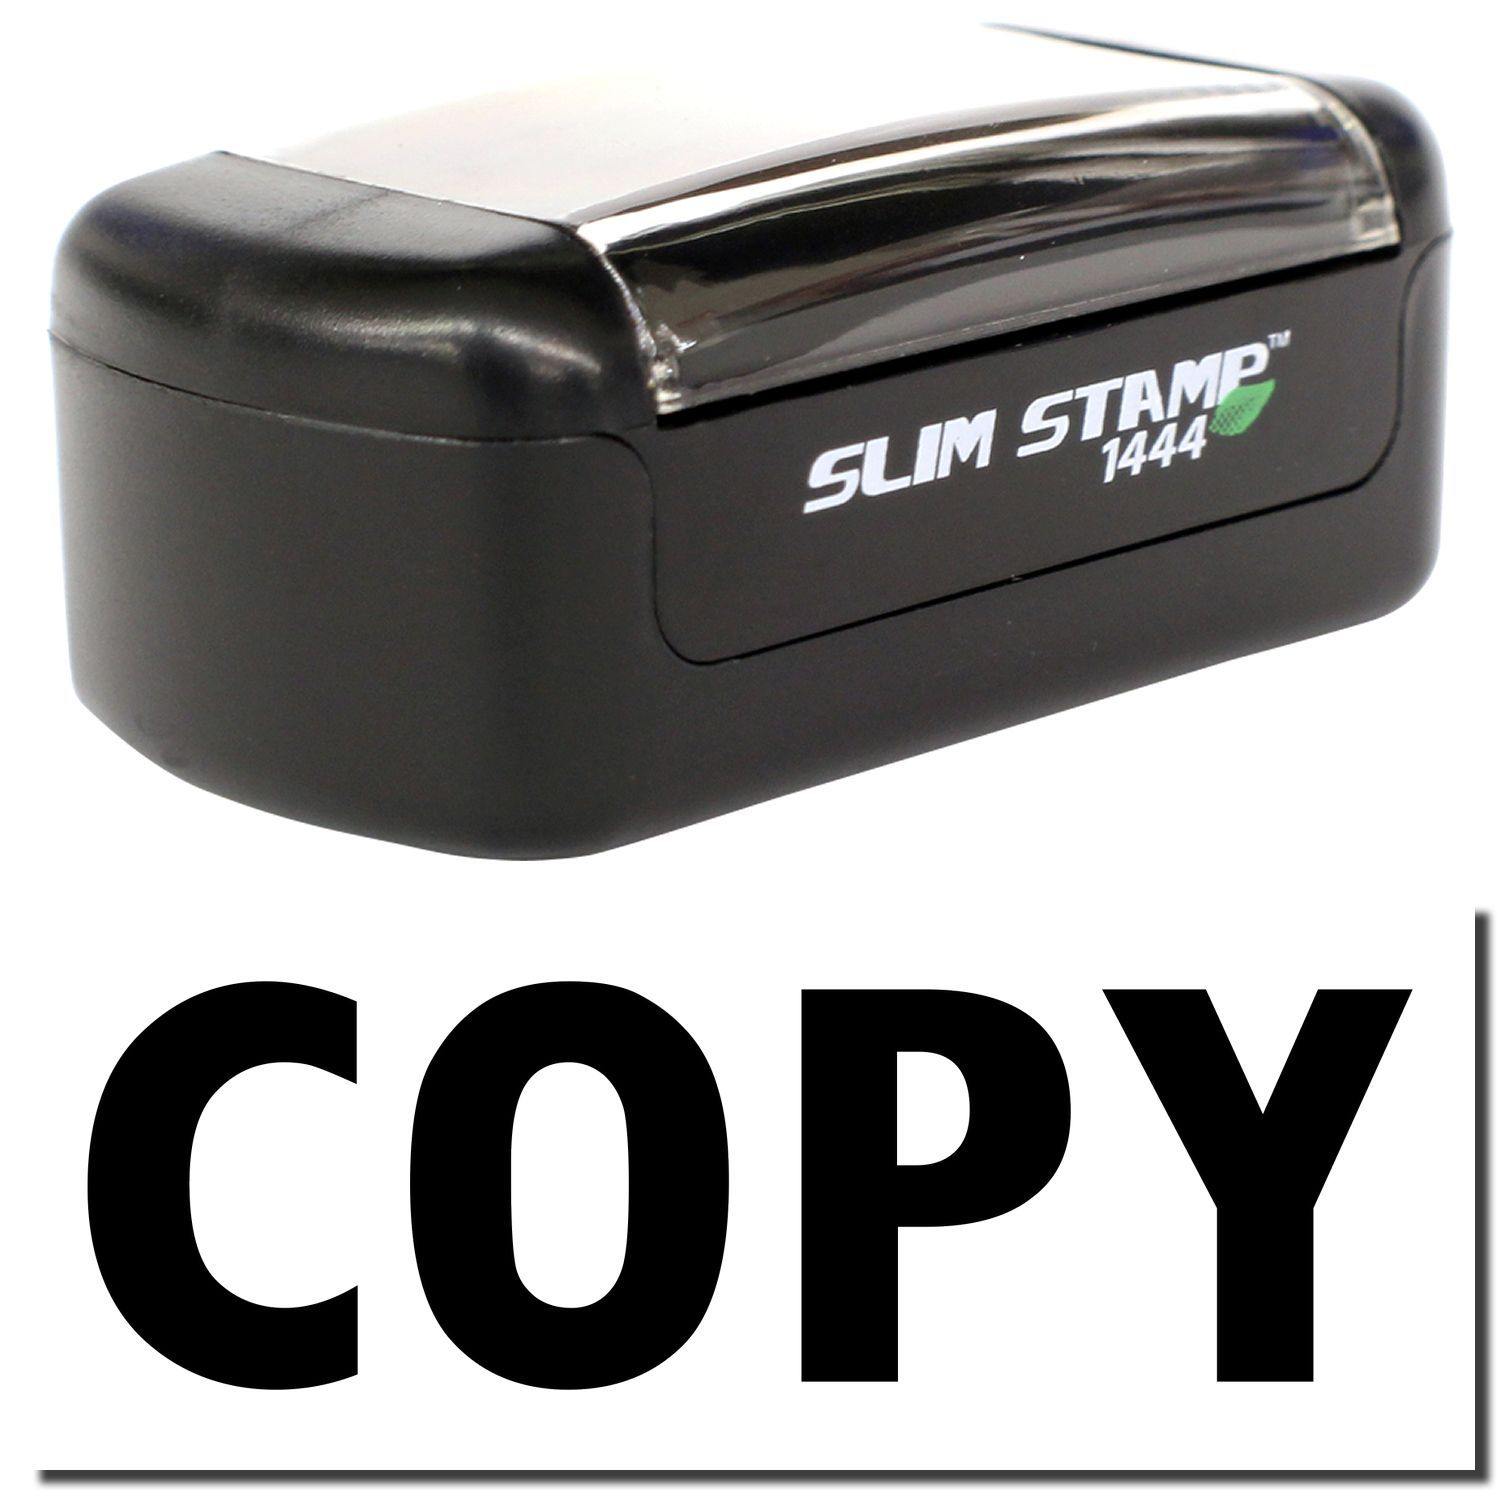 A stock office pre-inked stamp with a stamped image showing how the text "COPY" is displayed after stamping.